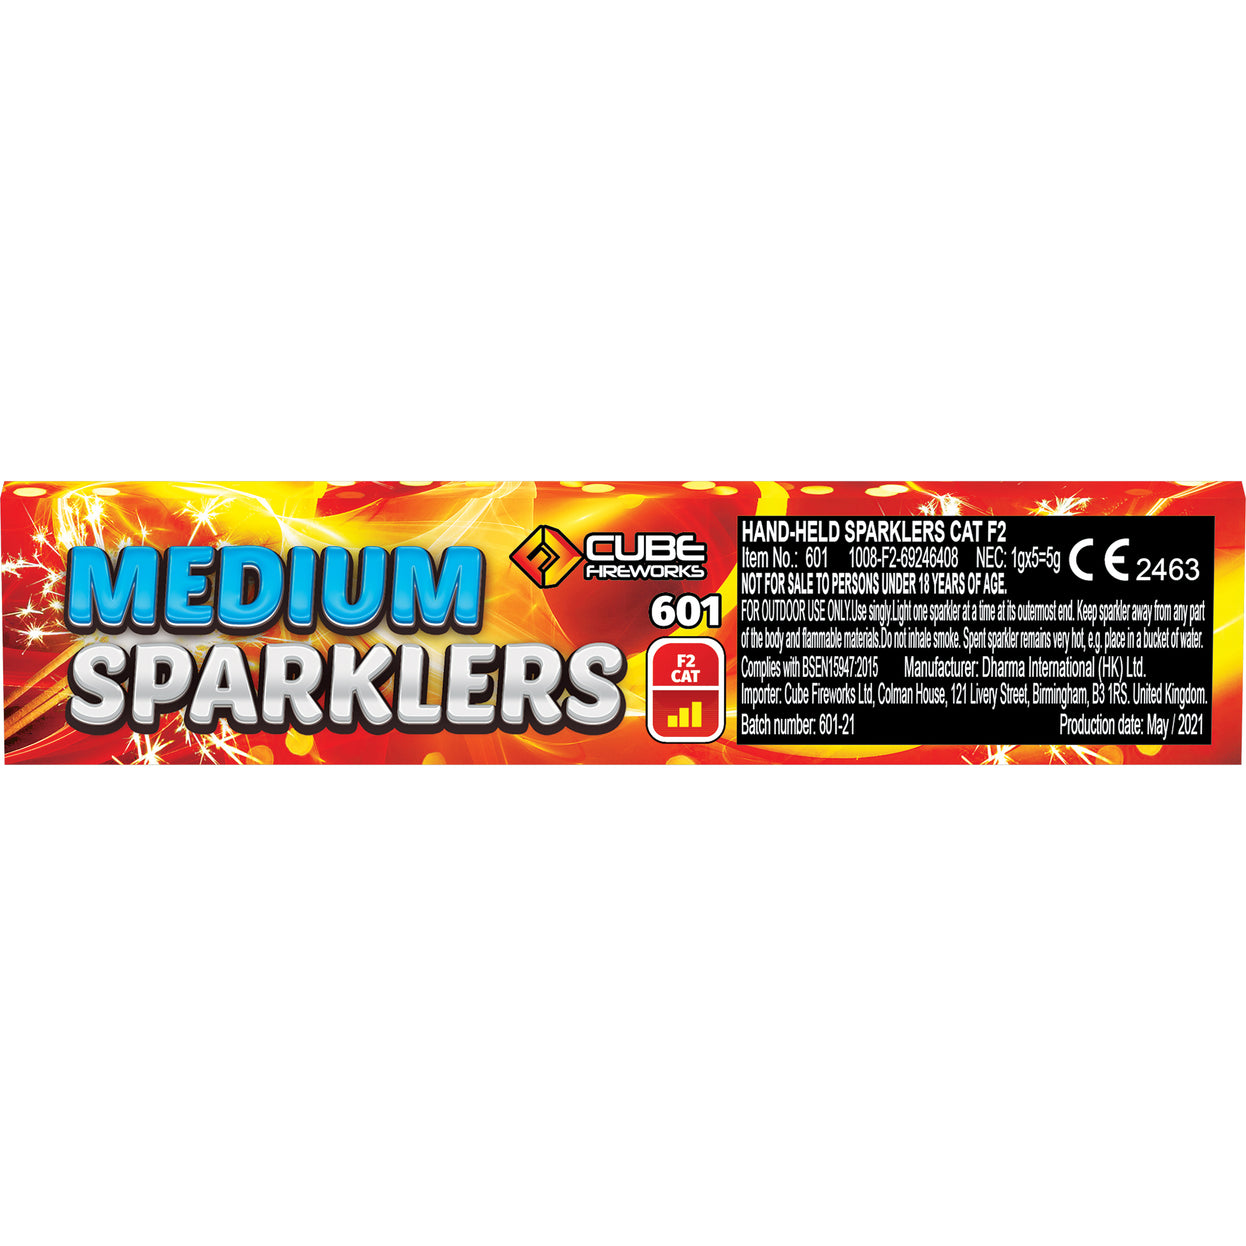 Medium Sparklers By Benwell Fireworks or By Cube Fireworks